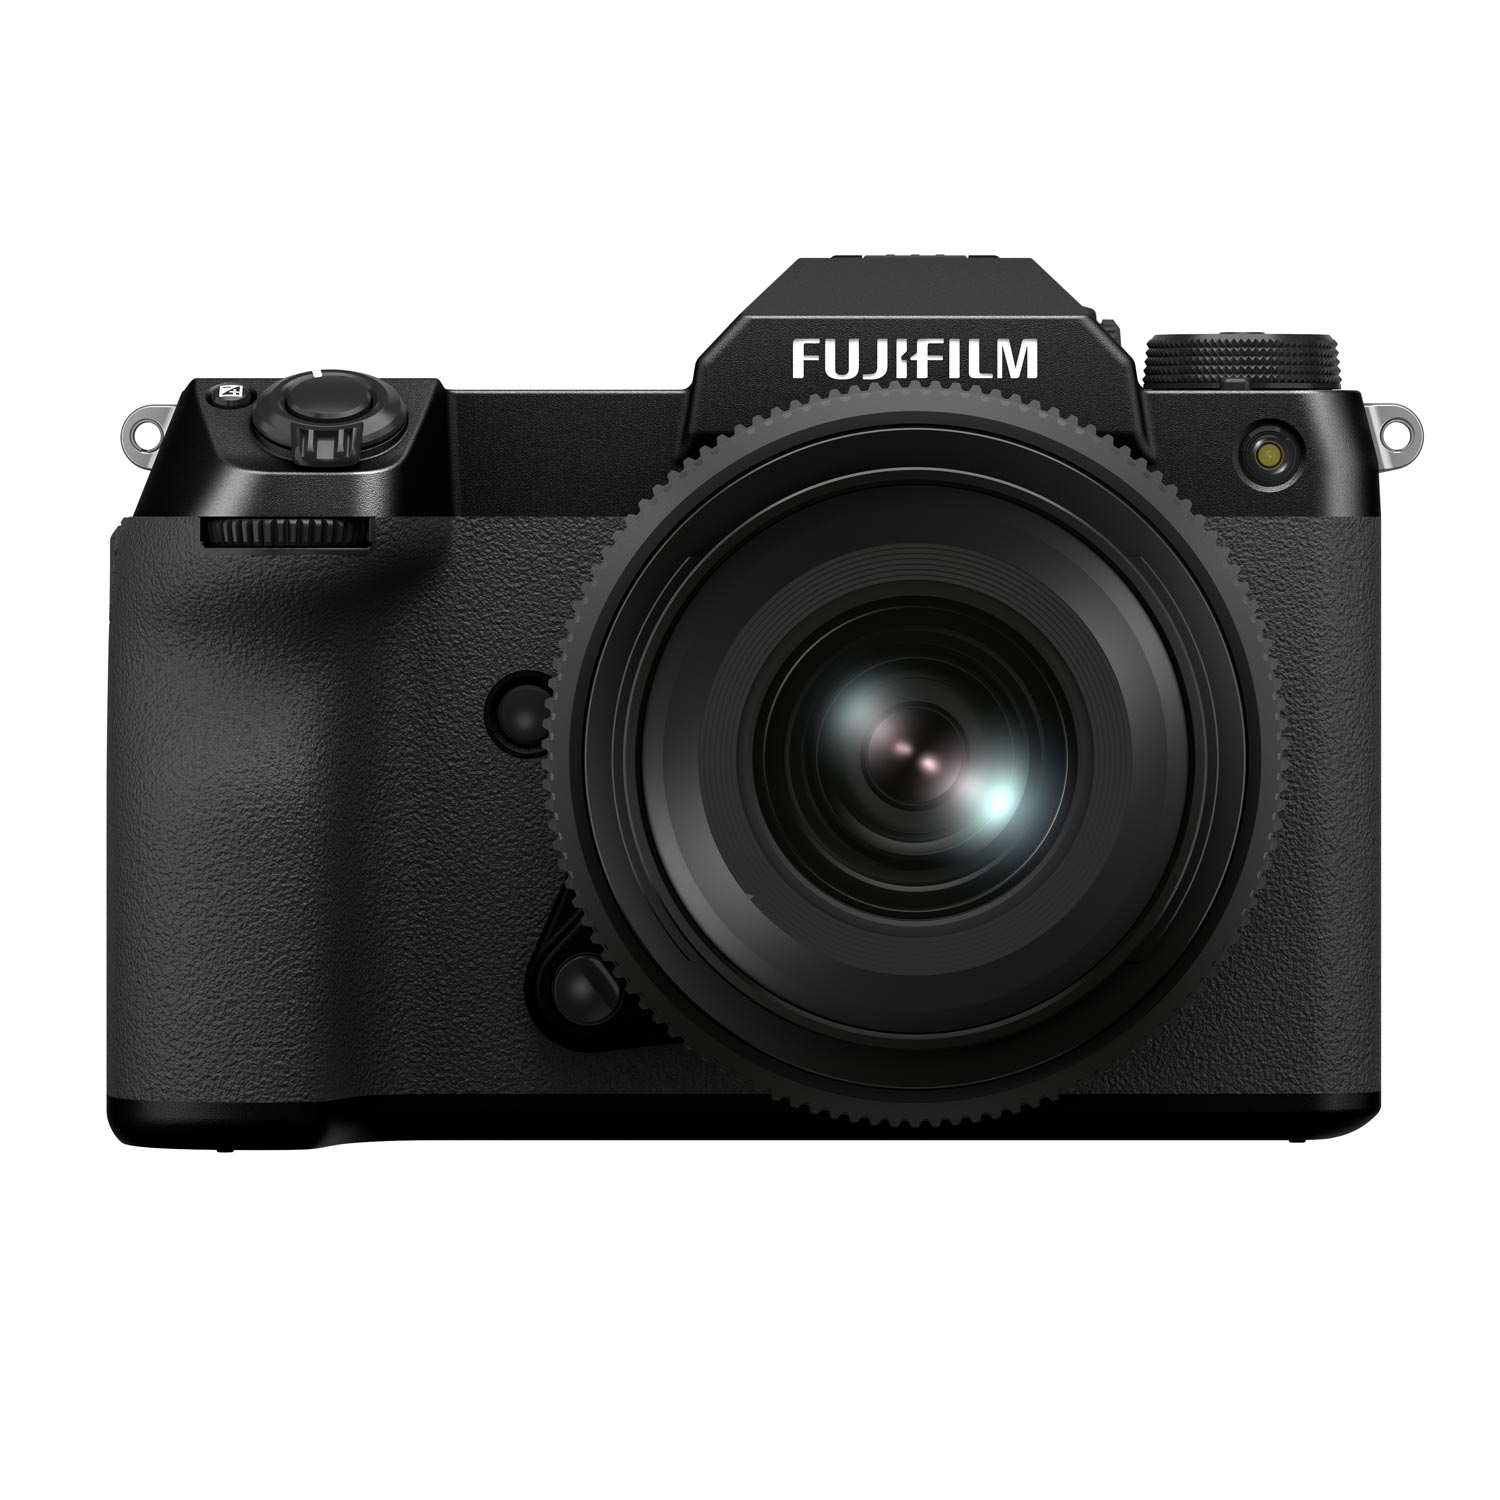 TThumbnail image for Fujifilm GFX 50S MkII with GF35-70mm F4.5-5.6 WR lens